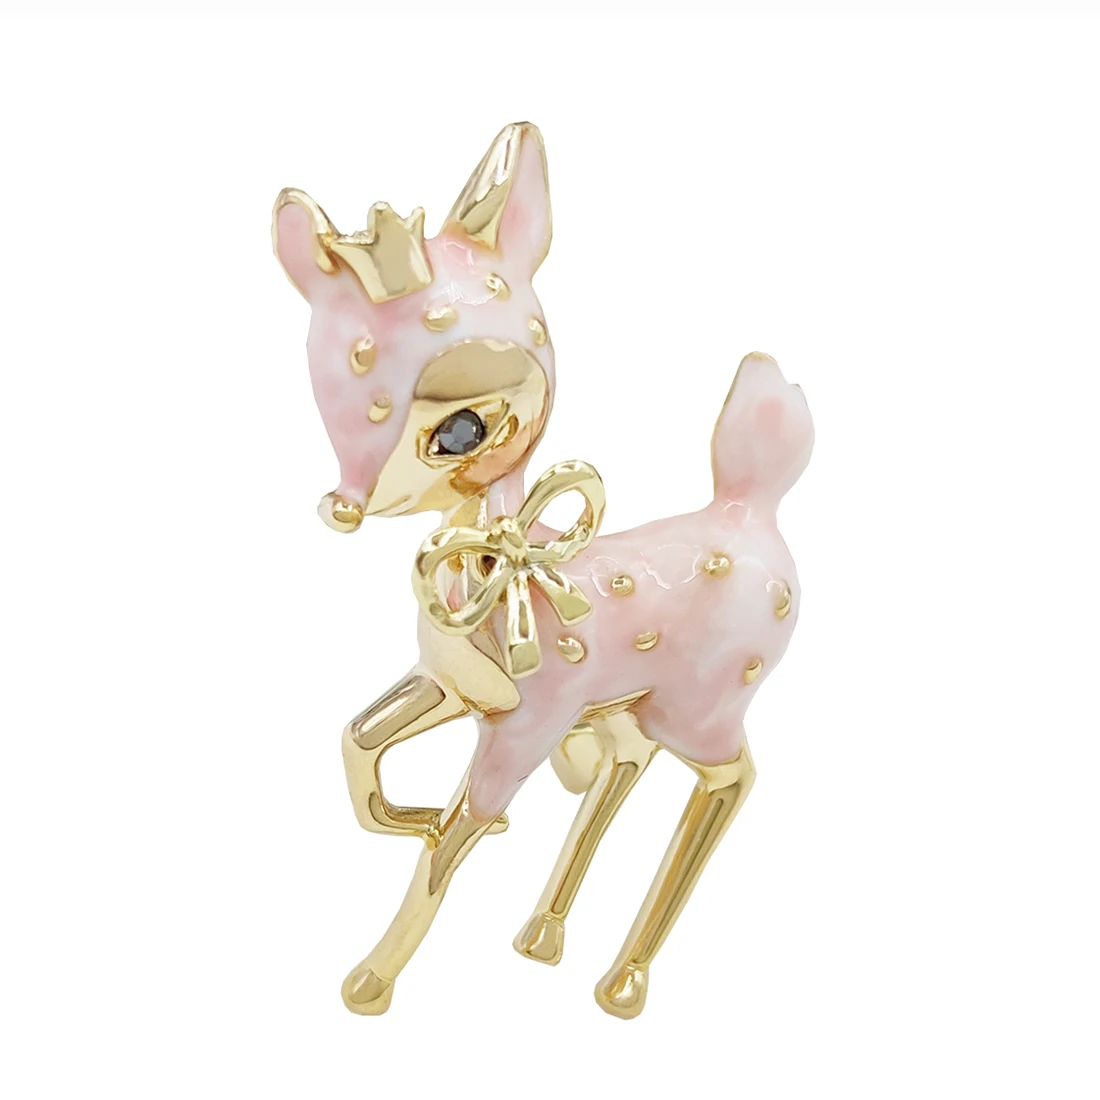 

Blucome Christmas Brooch for Women Cute Anime Sika Deer Men's Brooch for Christmas New Year Gift Quality Jewelry for Women 2021